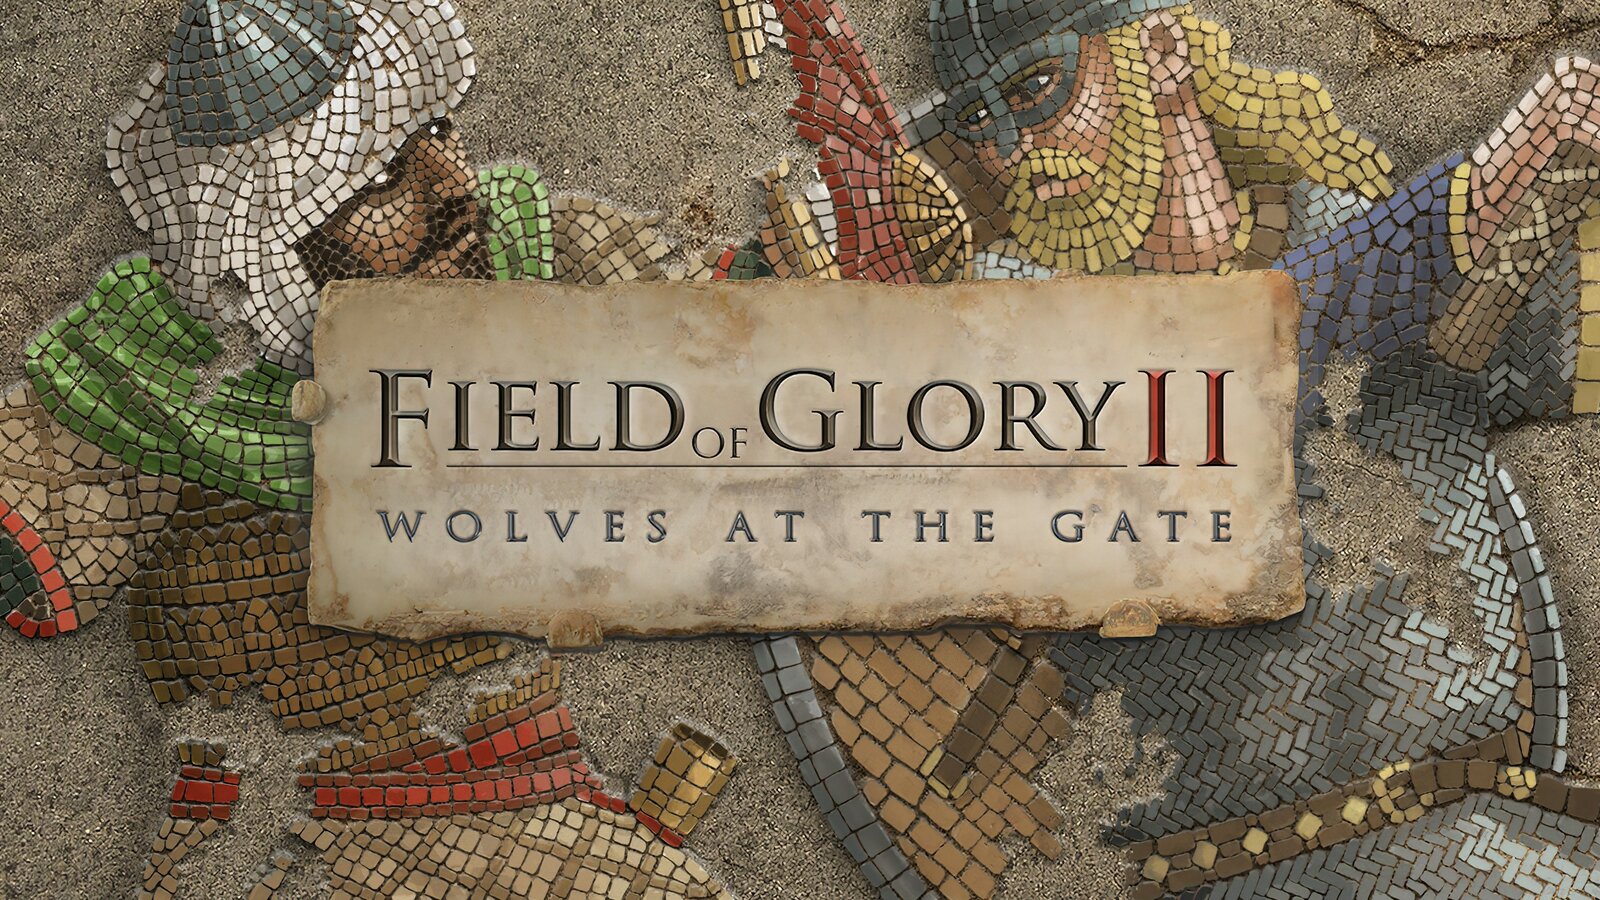 Field of Glory II - Wolves at the Gate